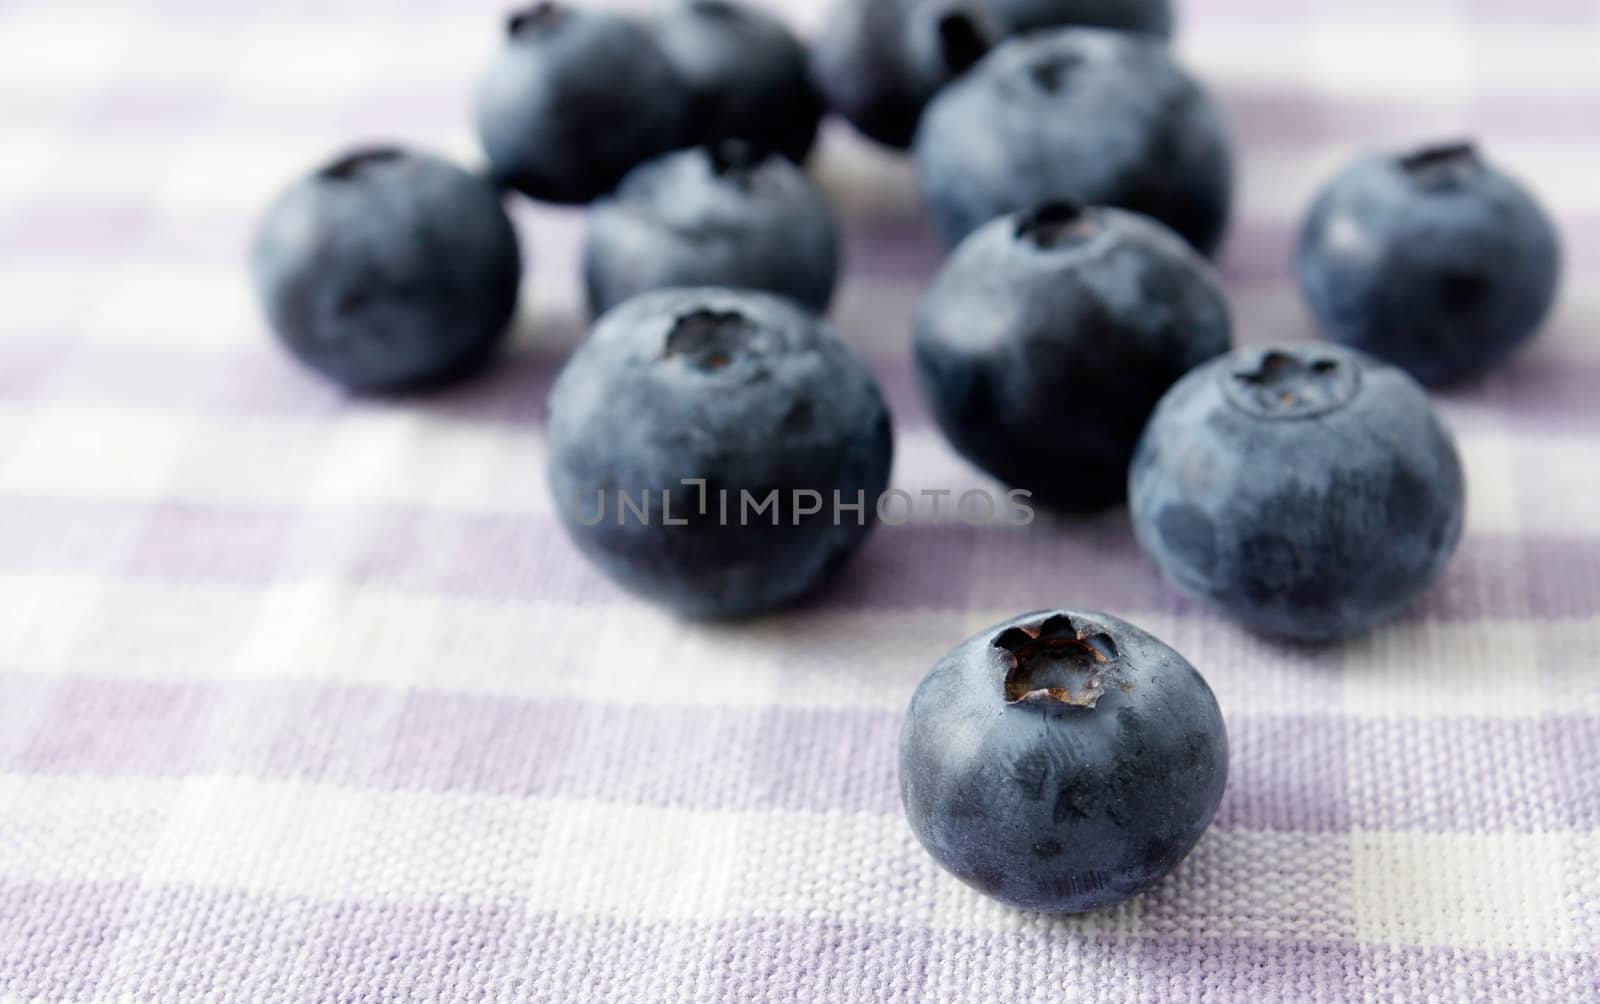 Blueberries photographed in a studio